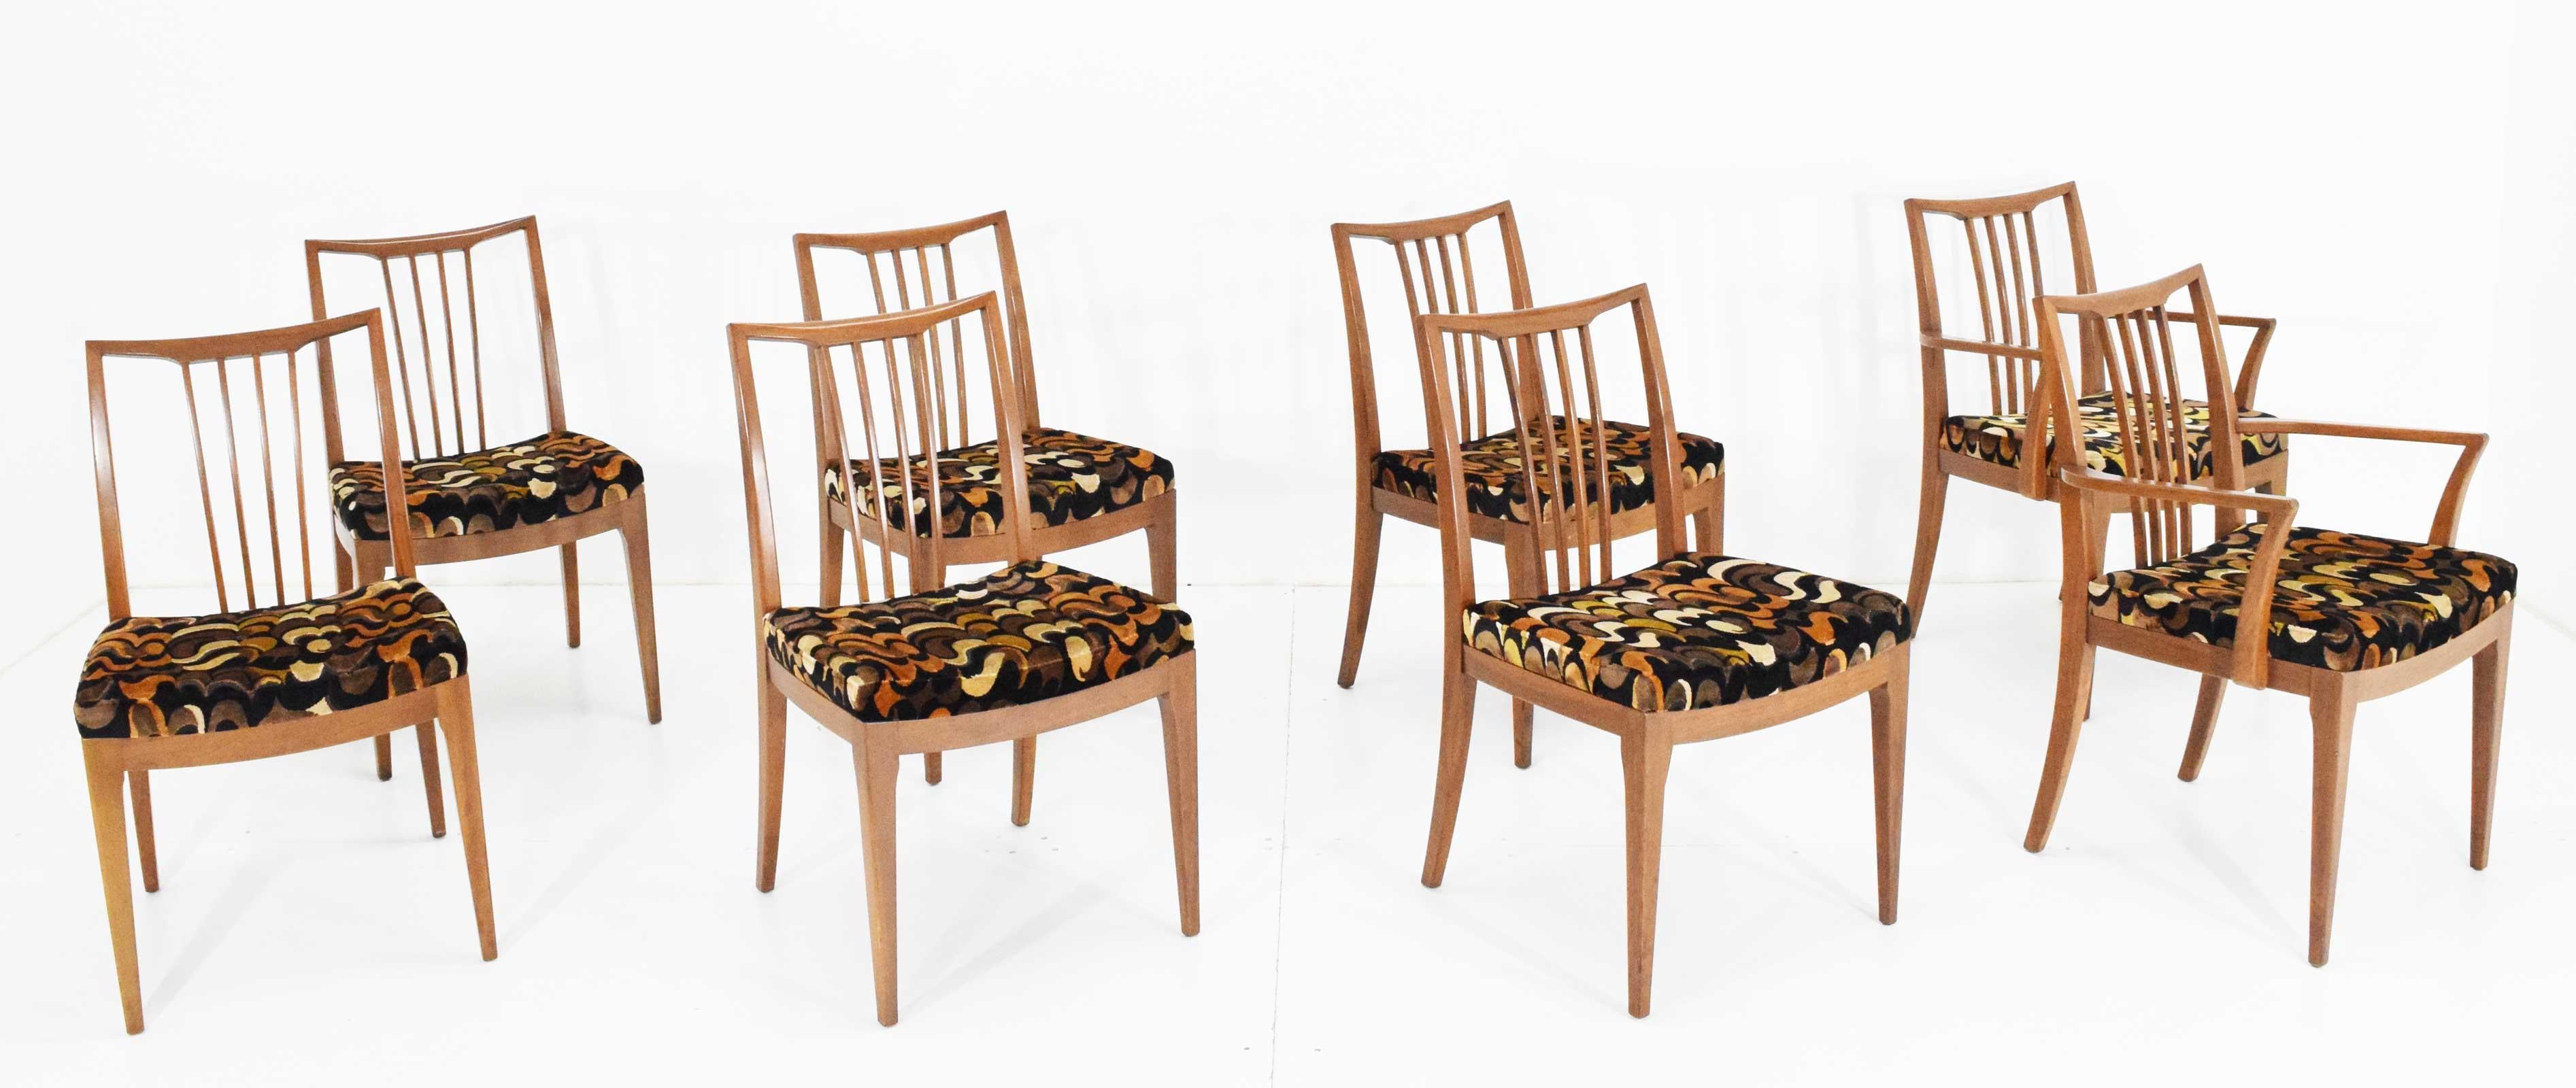 Beautiful set of midcentury dining chairs in a Jack Lenor Larsen velvet. Chairs are walnut and we believe attributed to George Nakashima for Widdicomb. 

Measurements of armchairs are 32.25